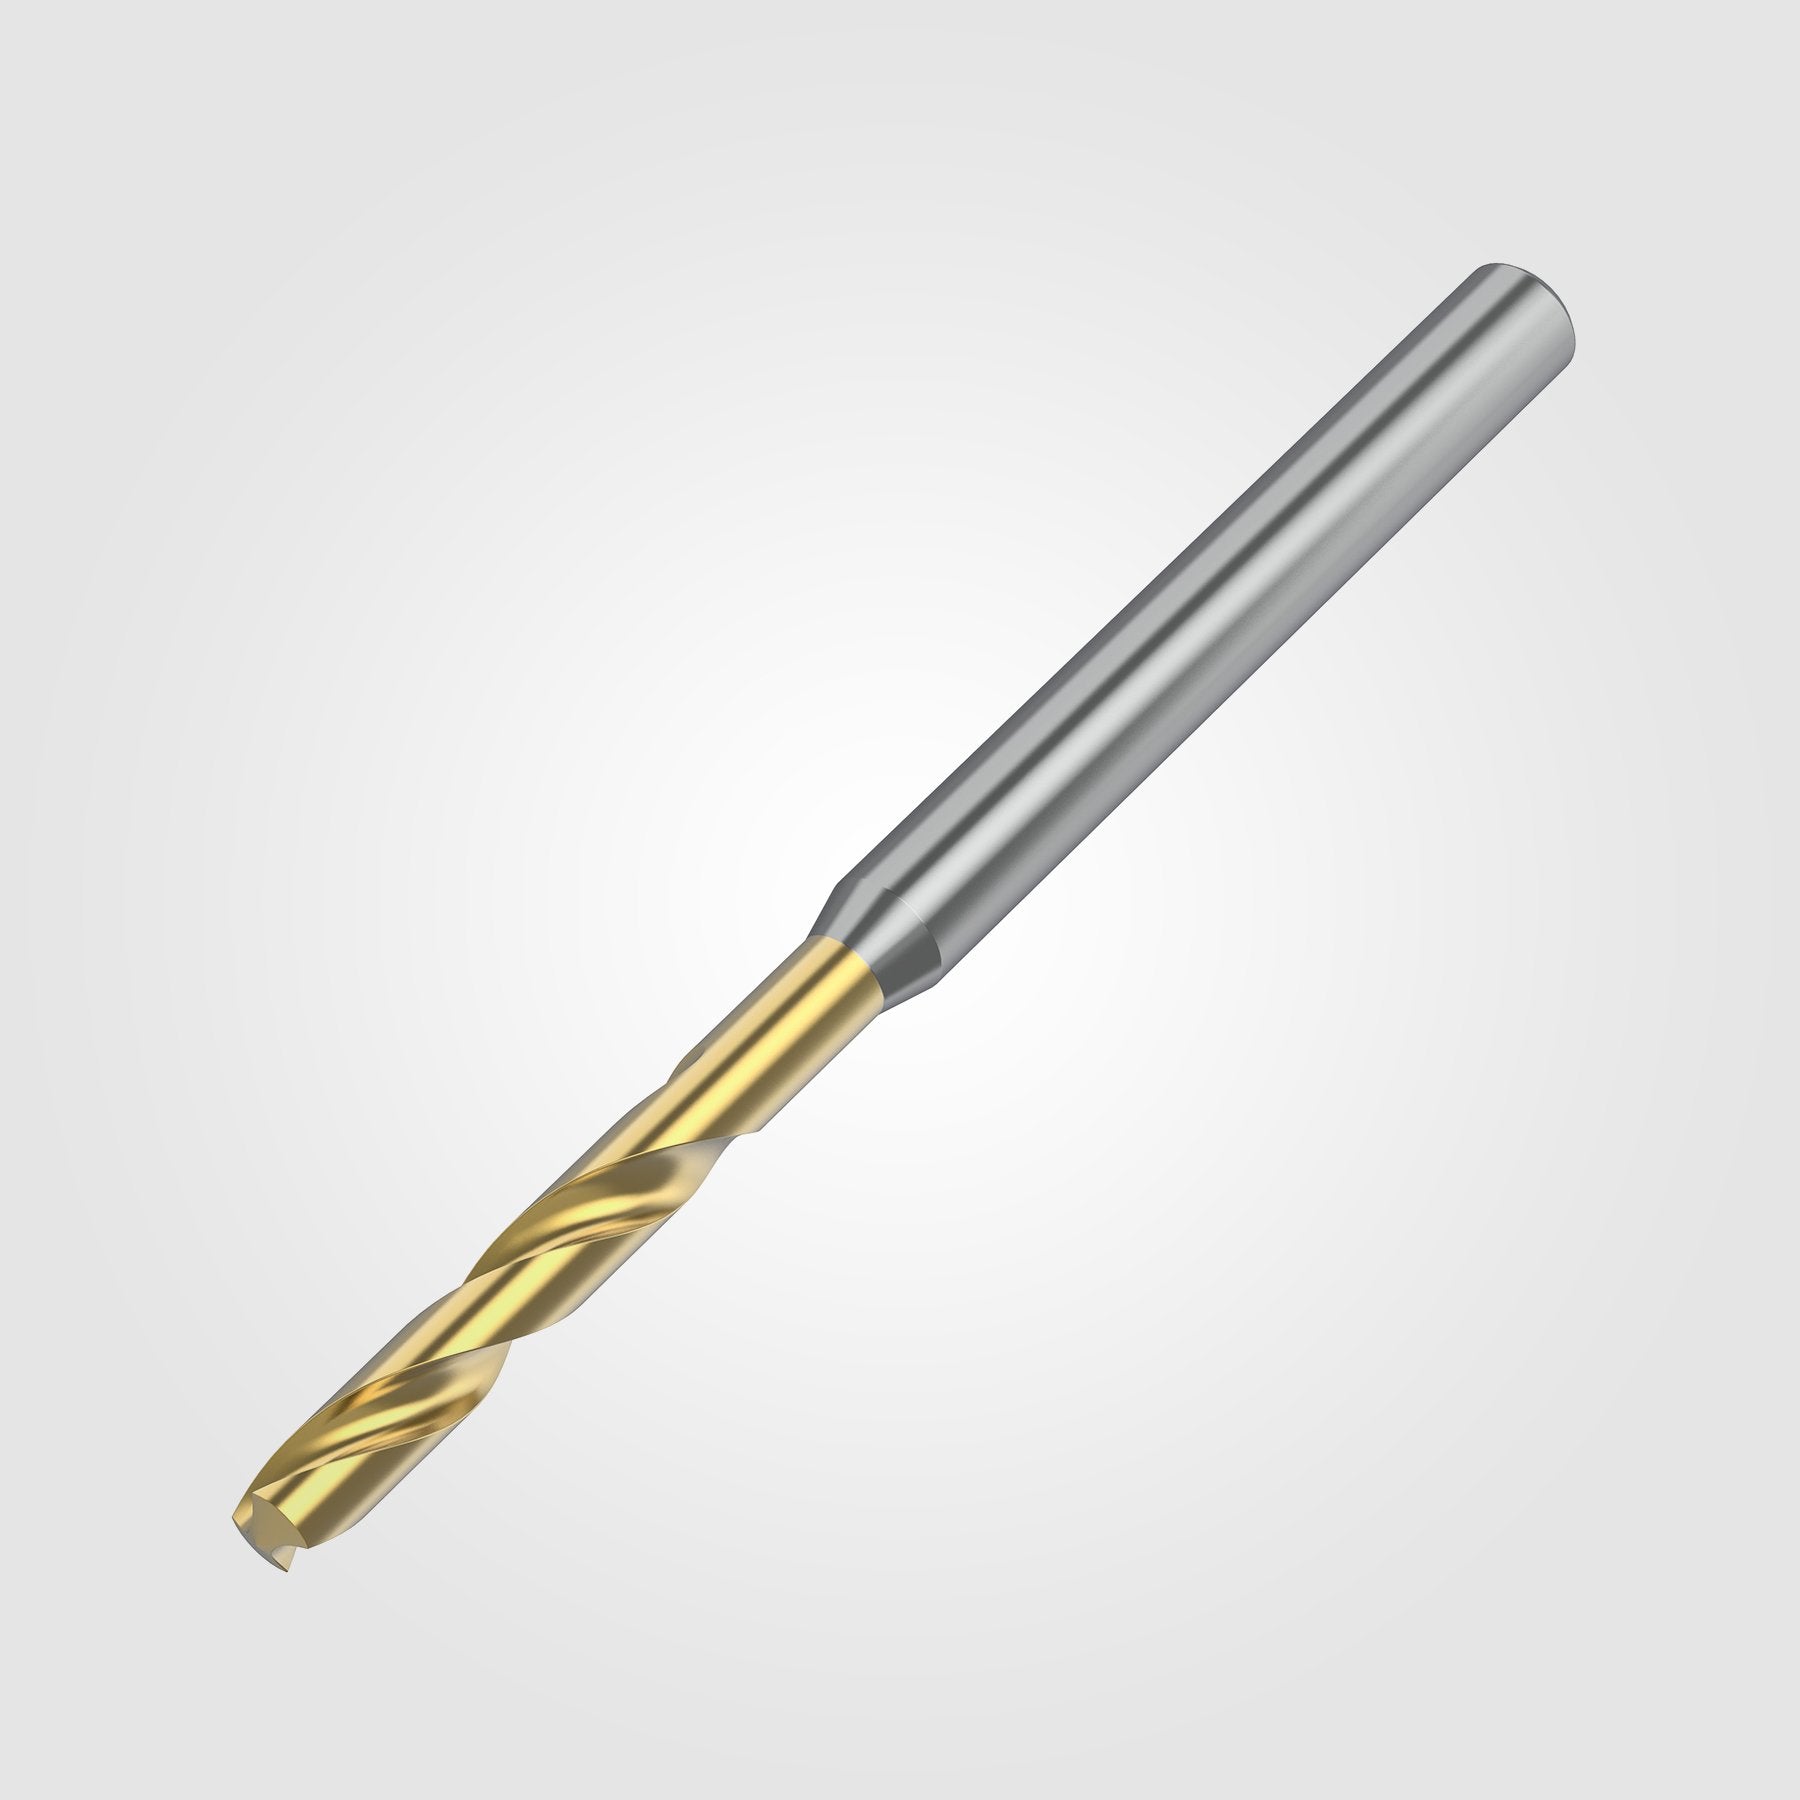 GOdrill (THROUGH COOLANT) | 15.6mm / .6142" / 3xD | SOLID CARBIDE DRILL | 4151271